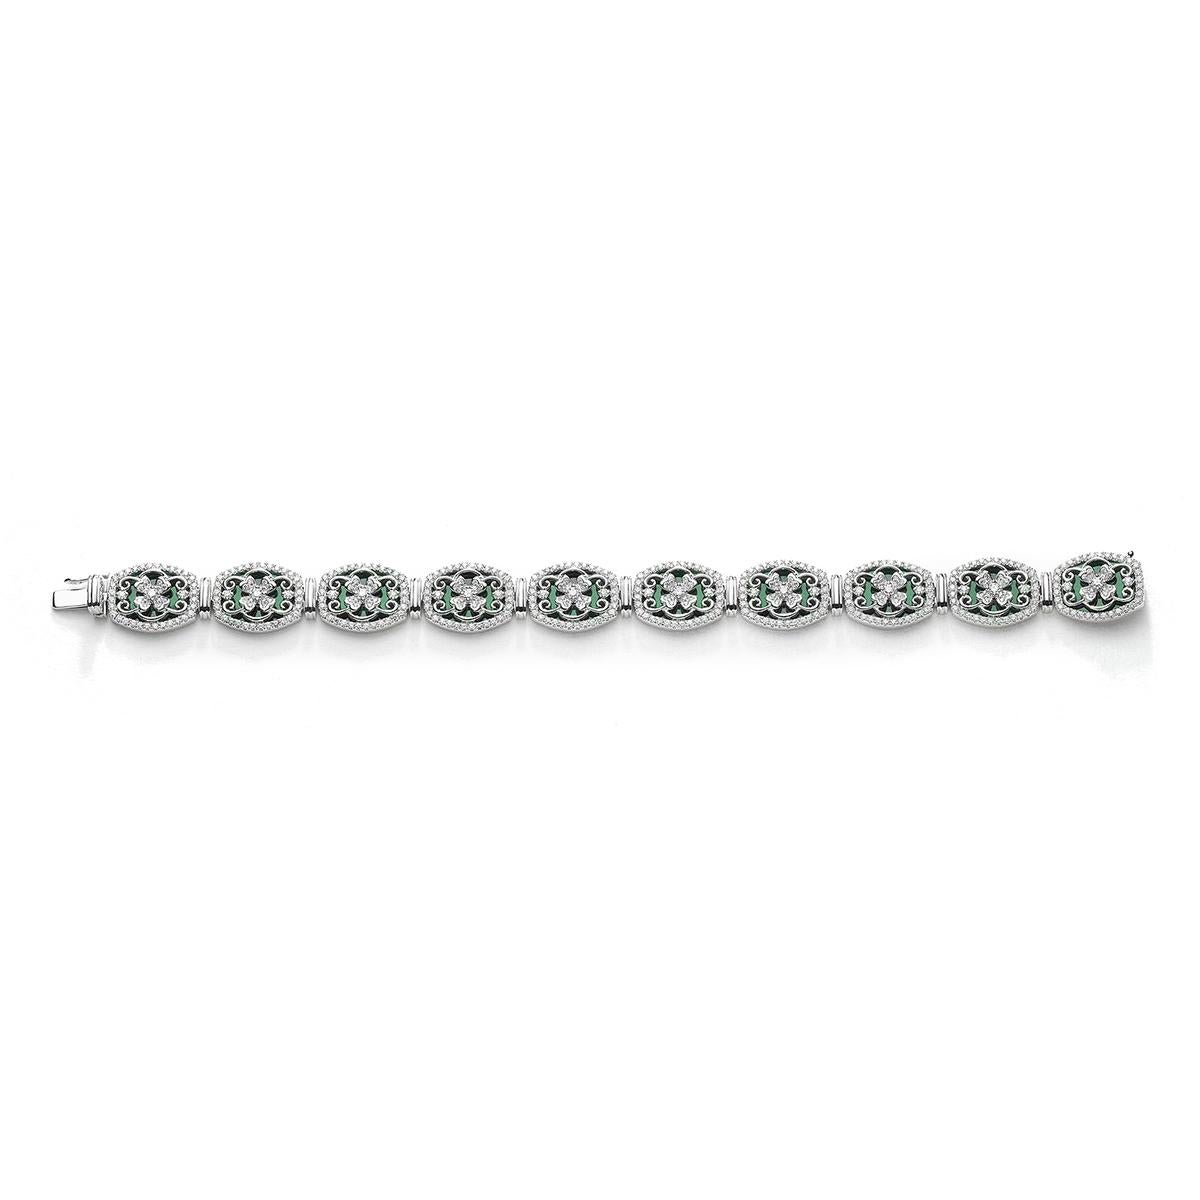 Bracelet in 18kt white gold set with 470 diamonds 3.03 cts and 10 malachites 26.13 cts